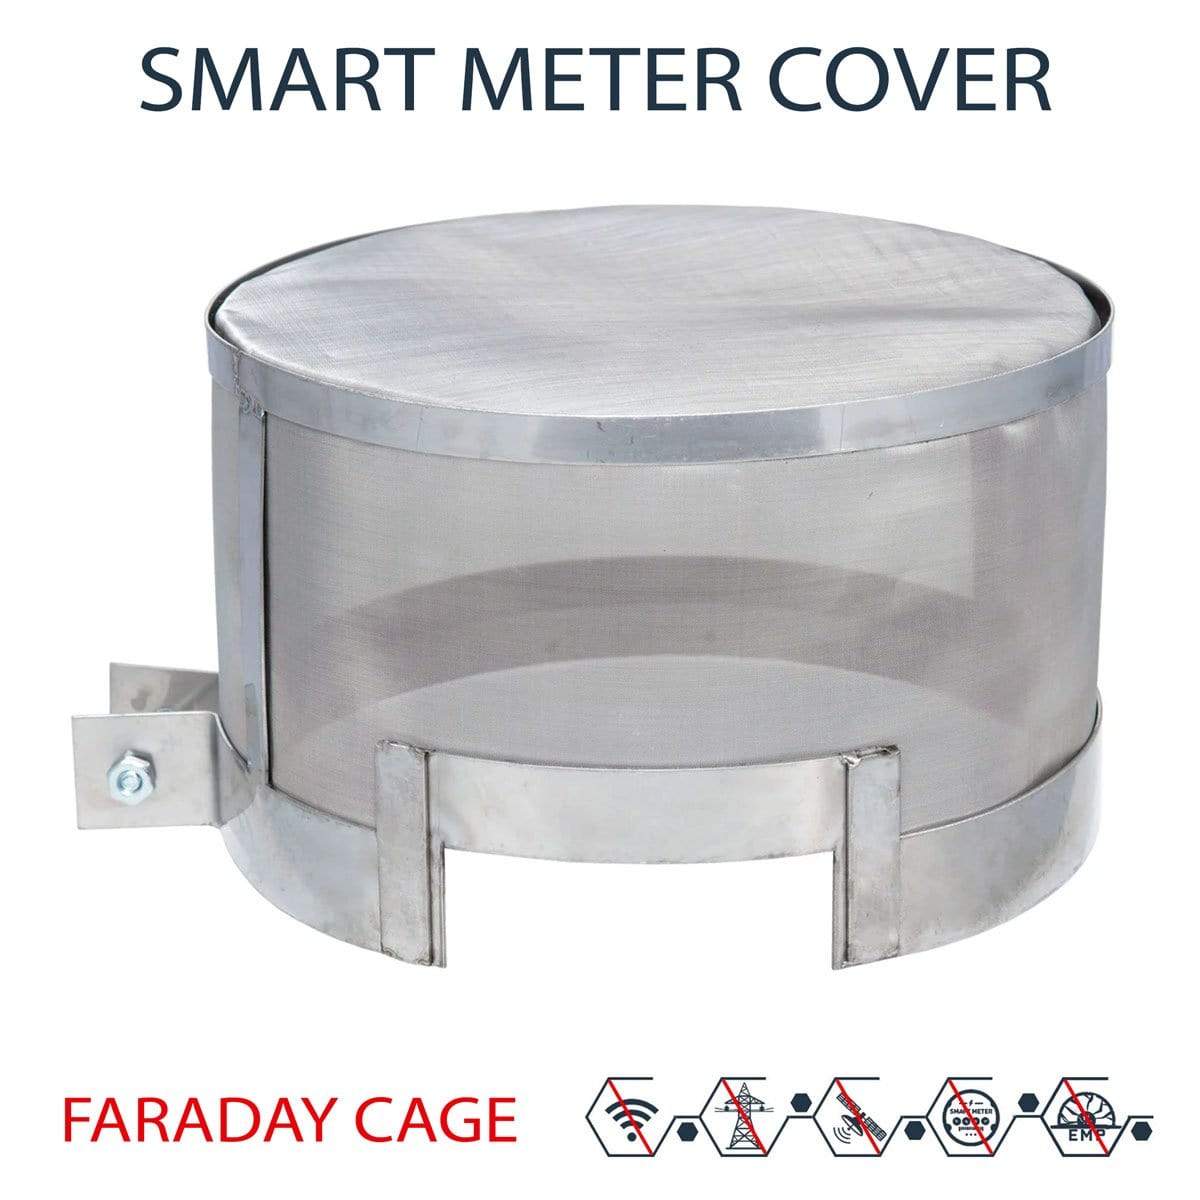 [2021 UPDATED] Smart Meter Cover RF Radiation Faraday Cage Guard for Electric | EMF Blocking Protection Conners Clinic Equipment - Conners Clinic